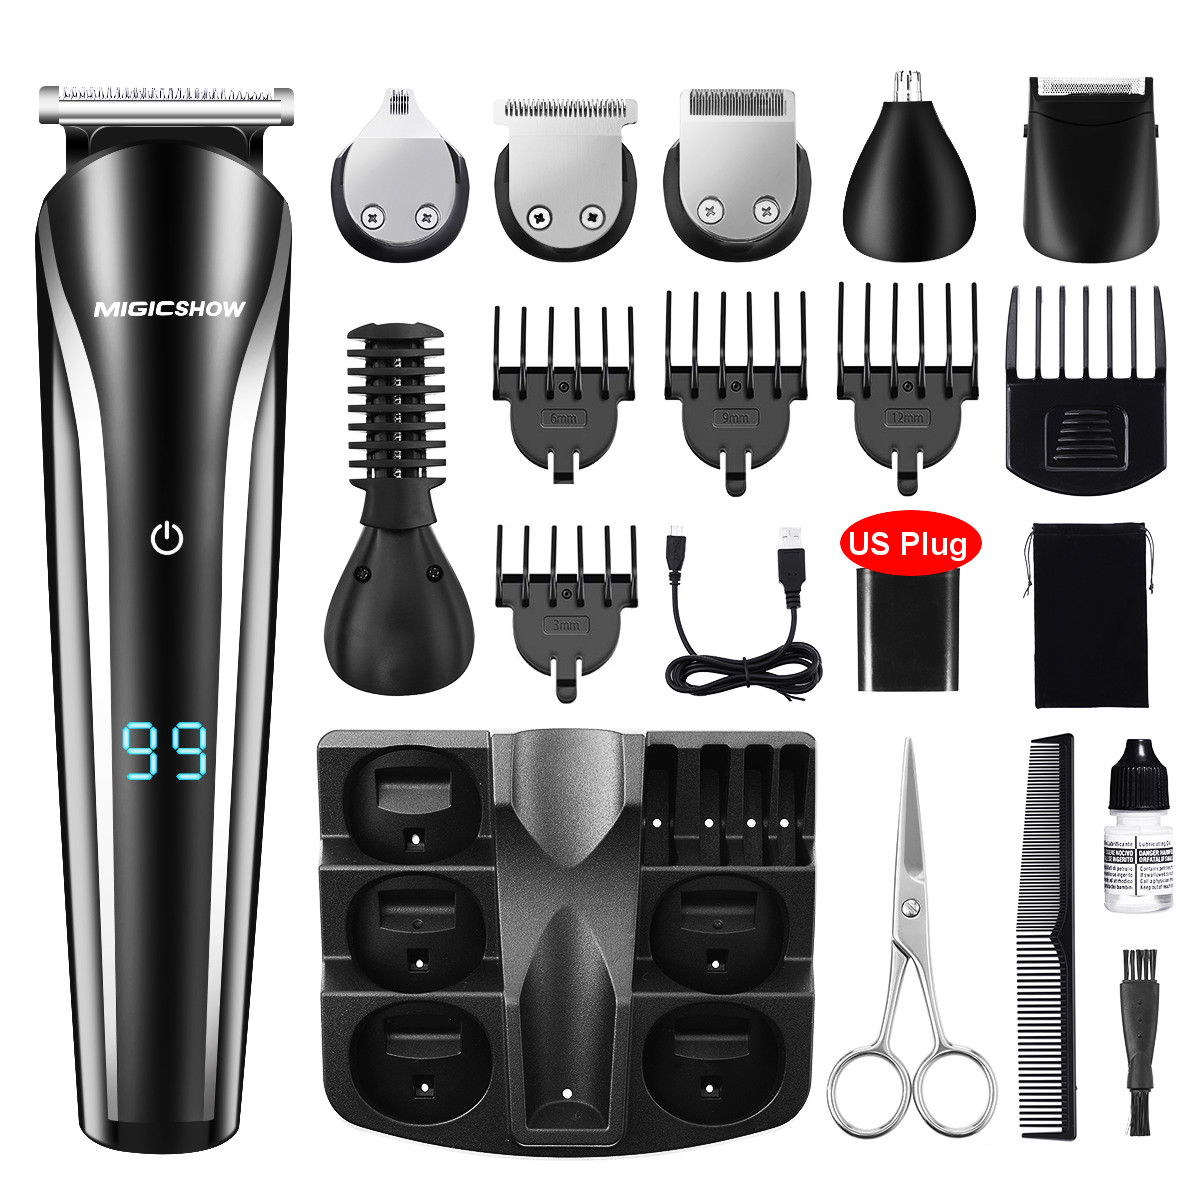 MIGICSHOW Beard Trimmer for Men, Hair Clippers Trimmer Waterproof Body  Mustache Nose Ear Facial Hair Cutting Groomer Precision Trimmer 11 in 1 Grooming  Kit LED Display USB - Walmart.com